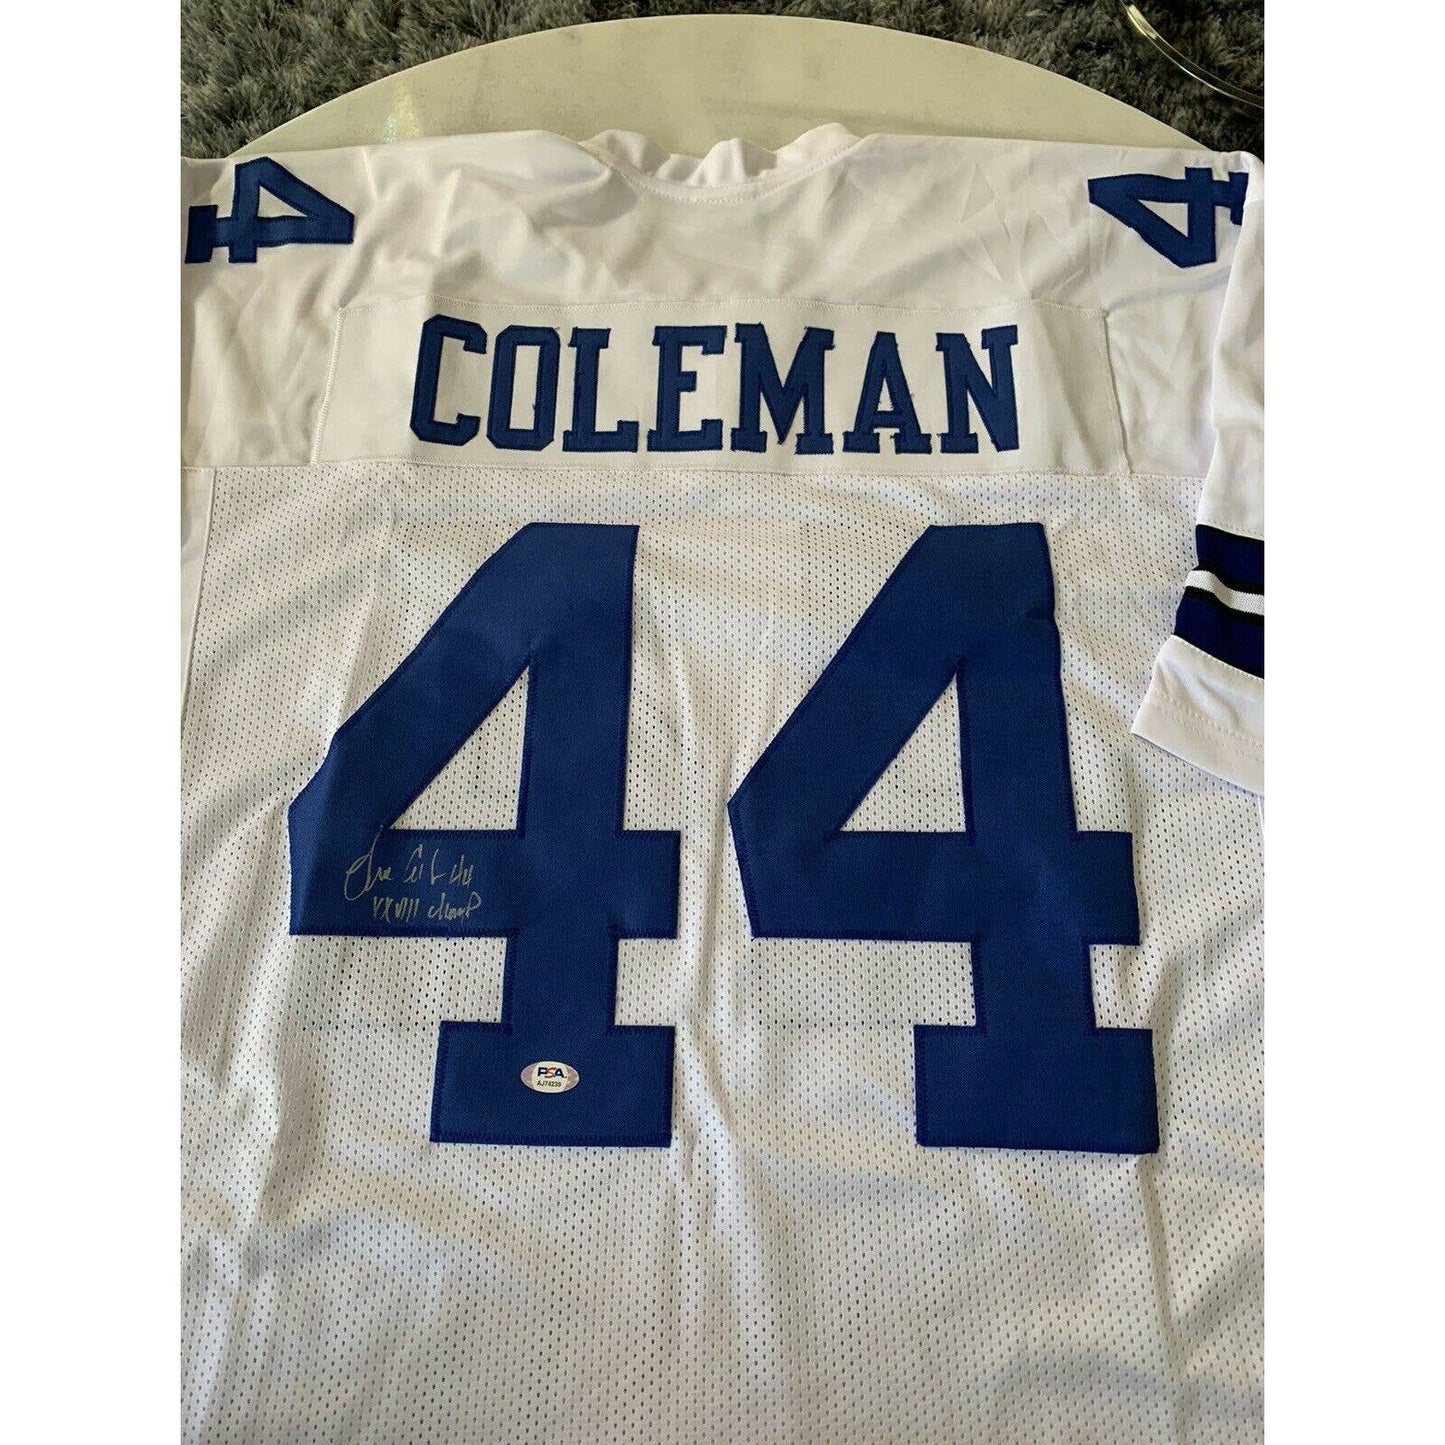 Lincoln Coleman Autographed/Signed Jersey PSA/DNA Sticker Dallas Cowboys - TreasuresEvolved